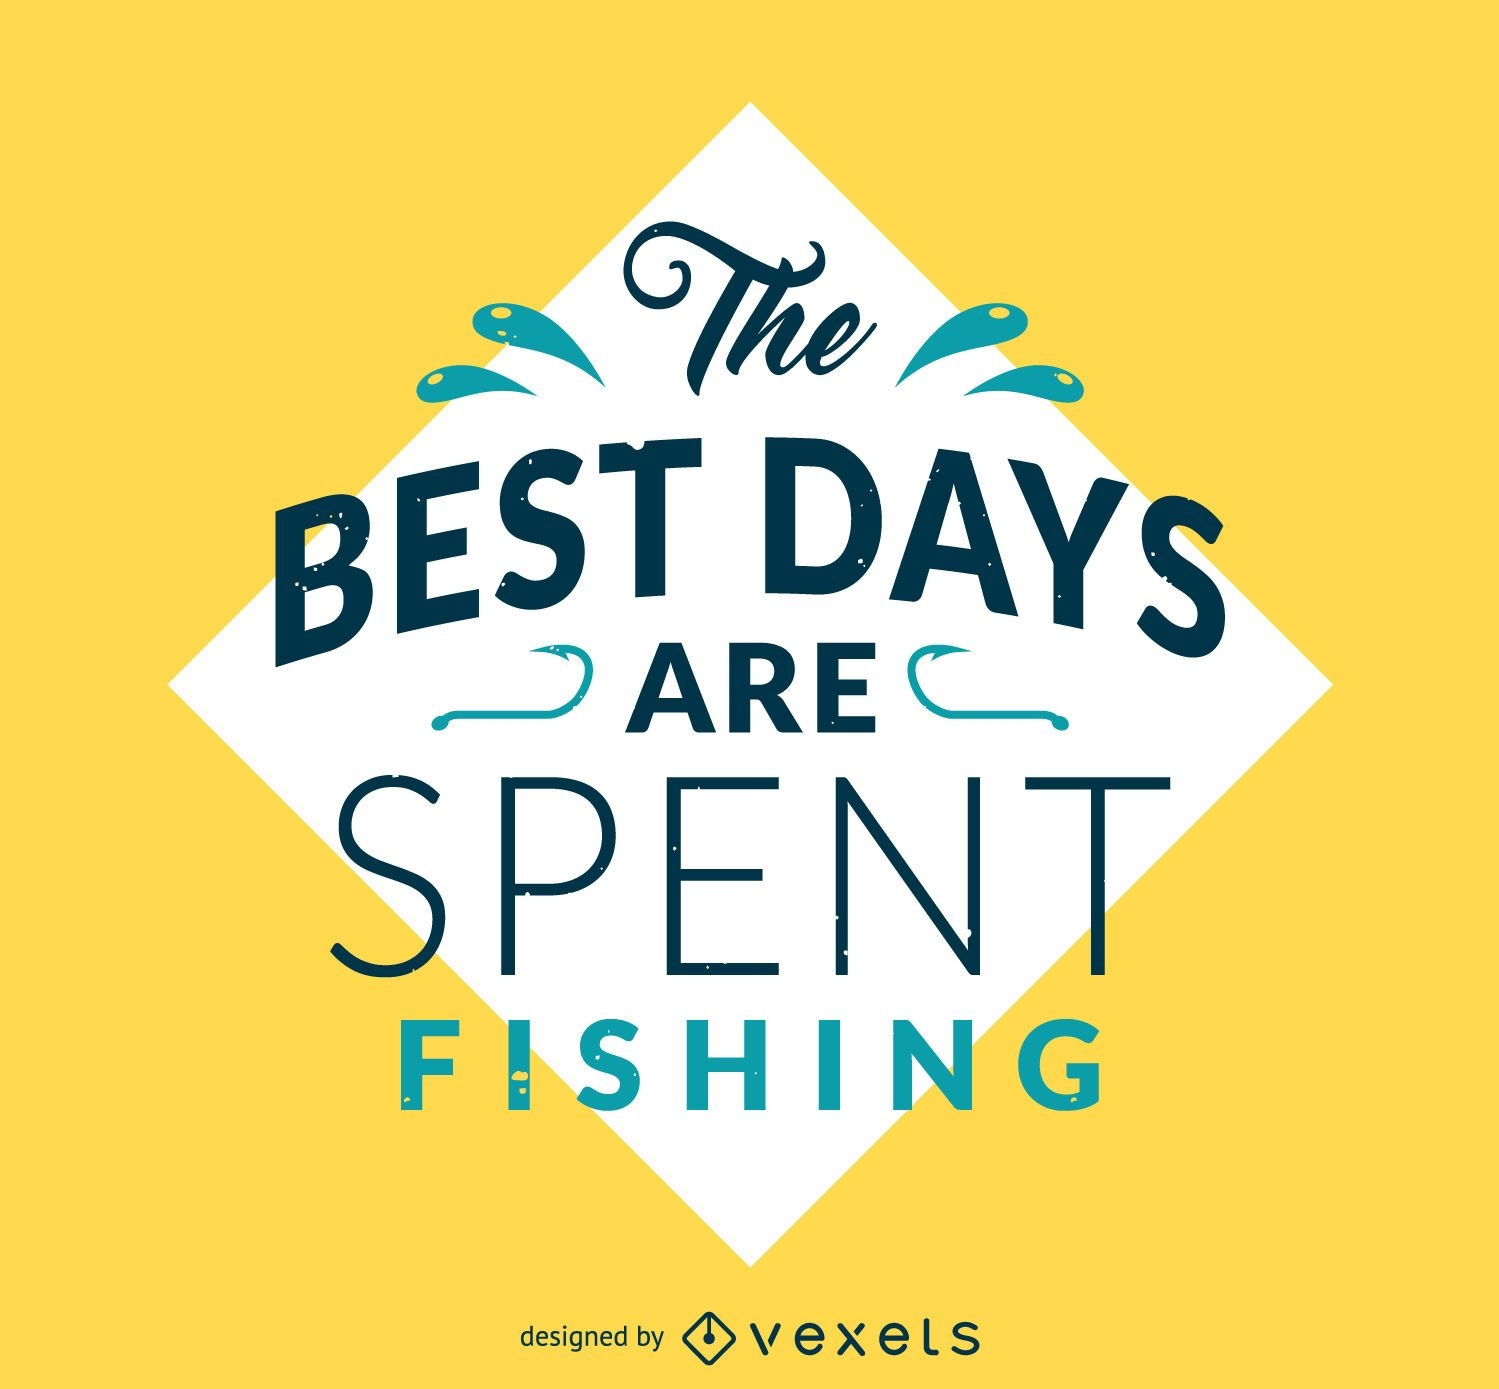 Best days spent fishing quote